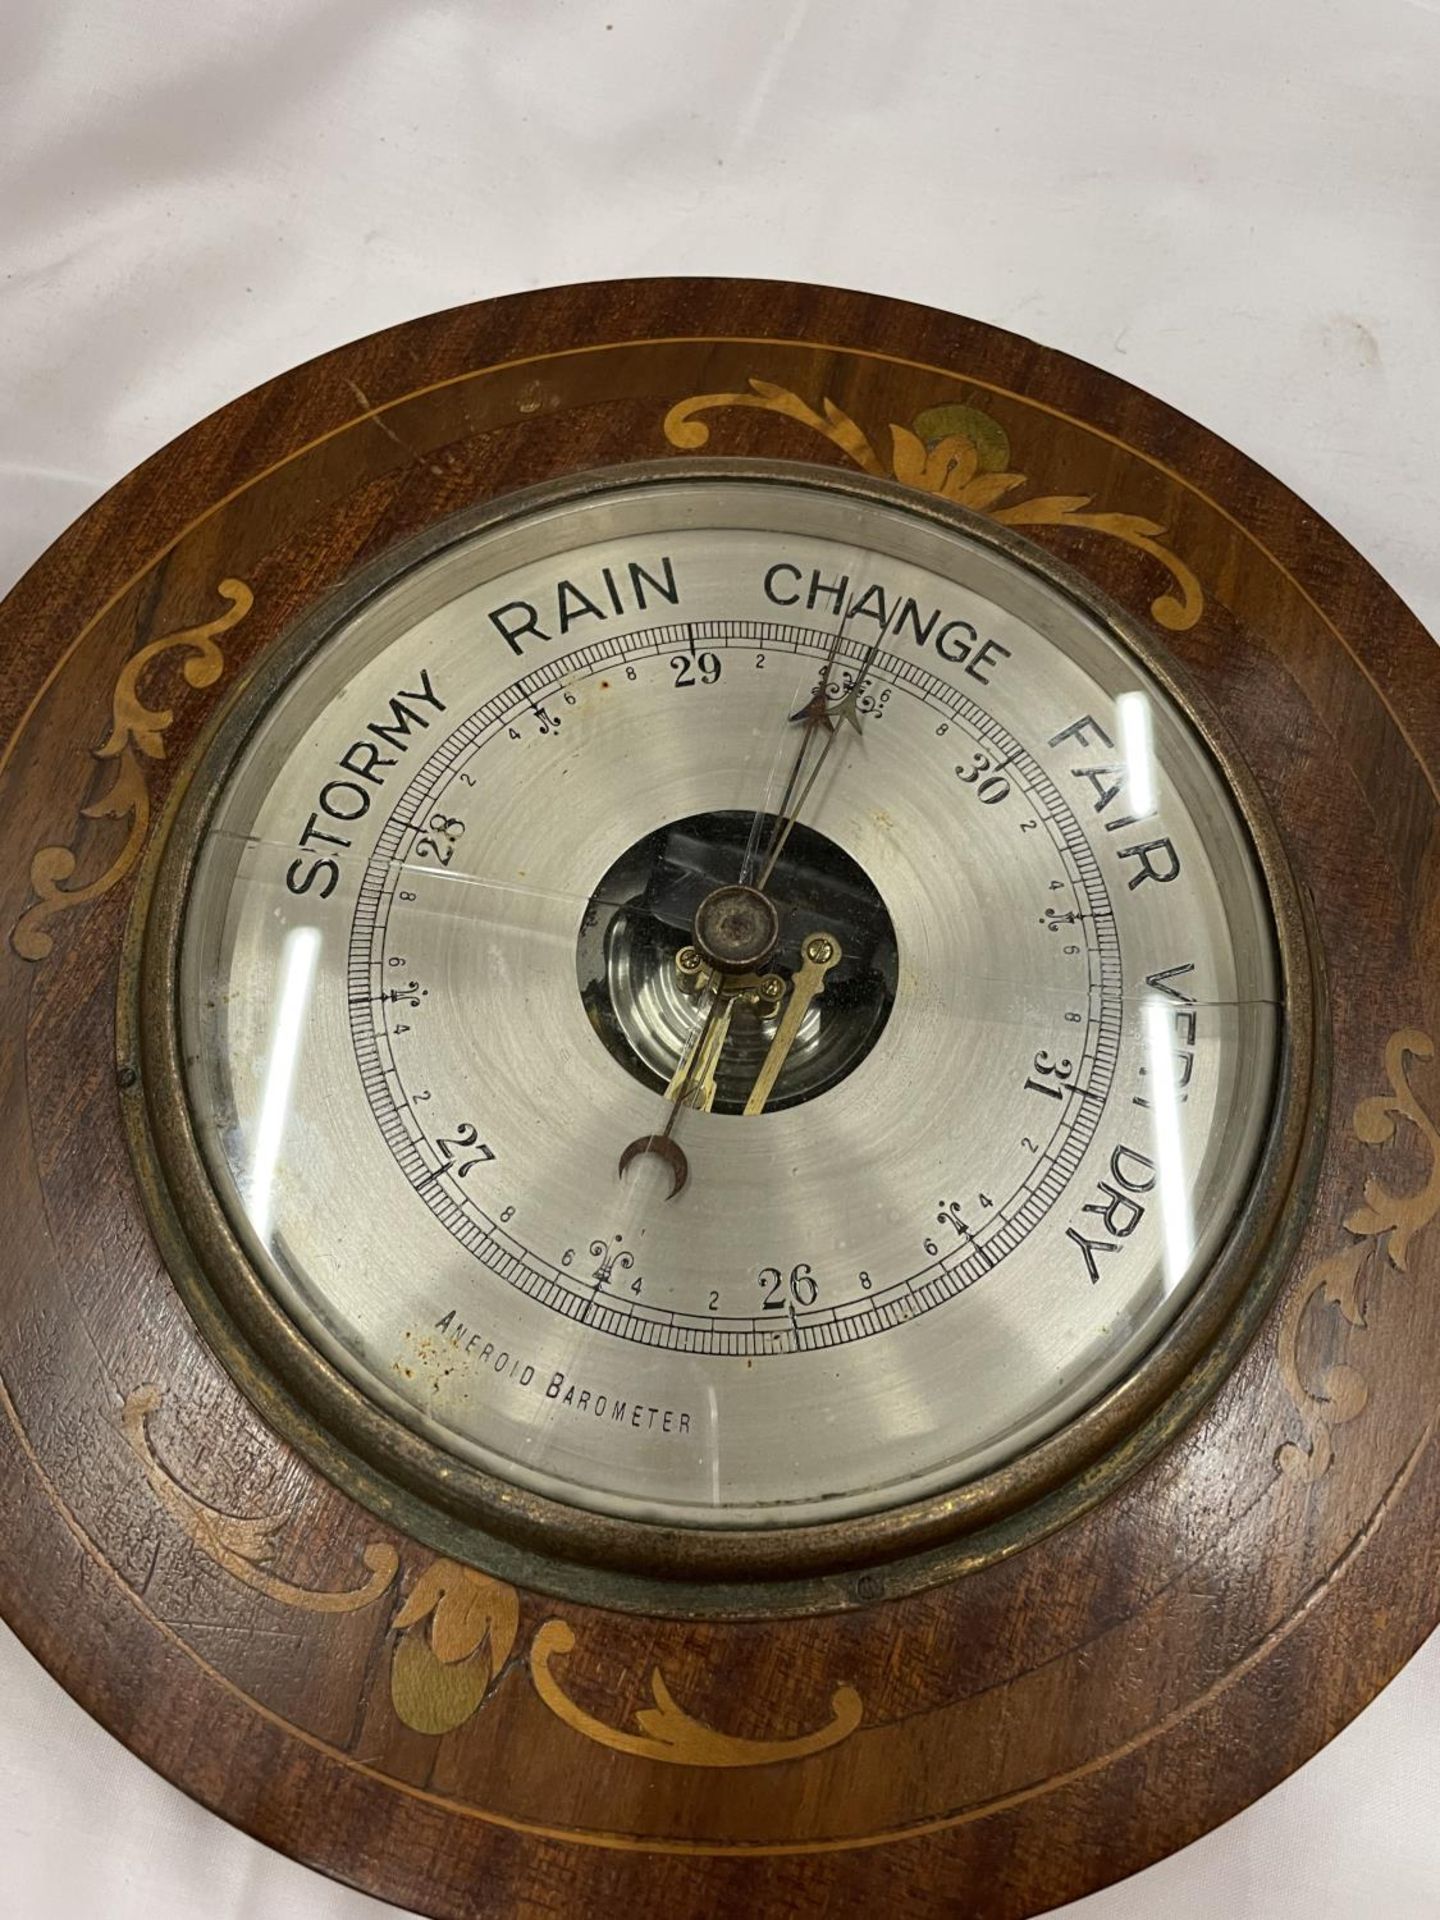 AN EDWARDIAN ROUND INLAID WALL BAROMETER - Image 2 of 4